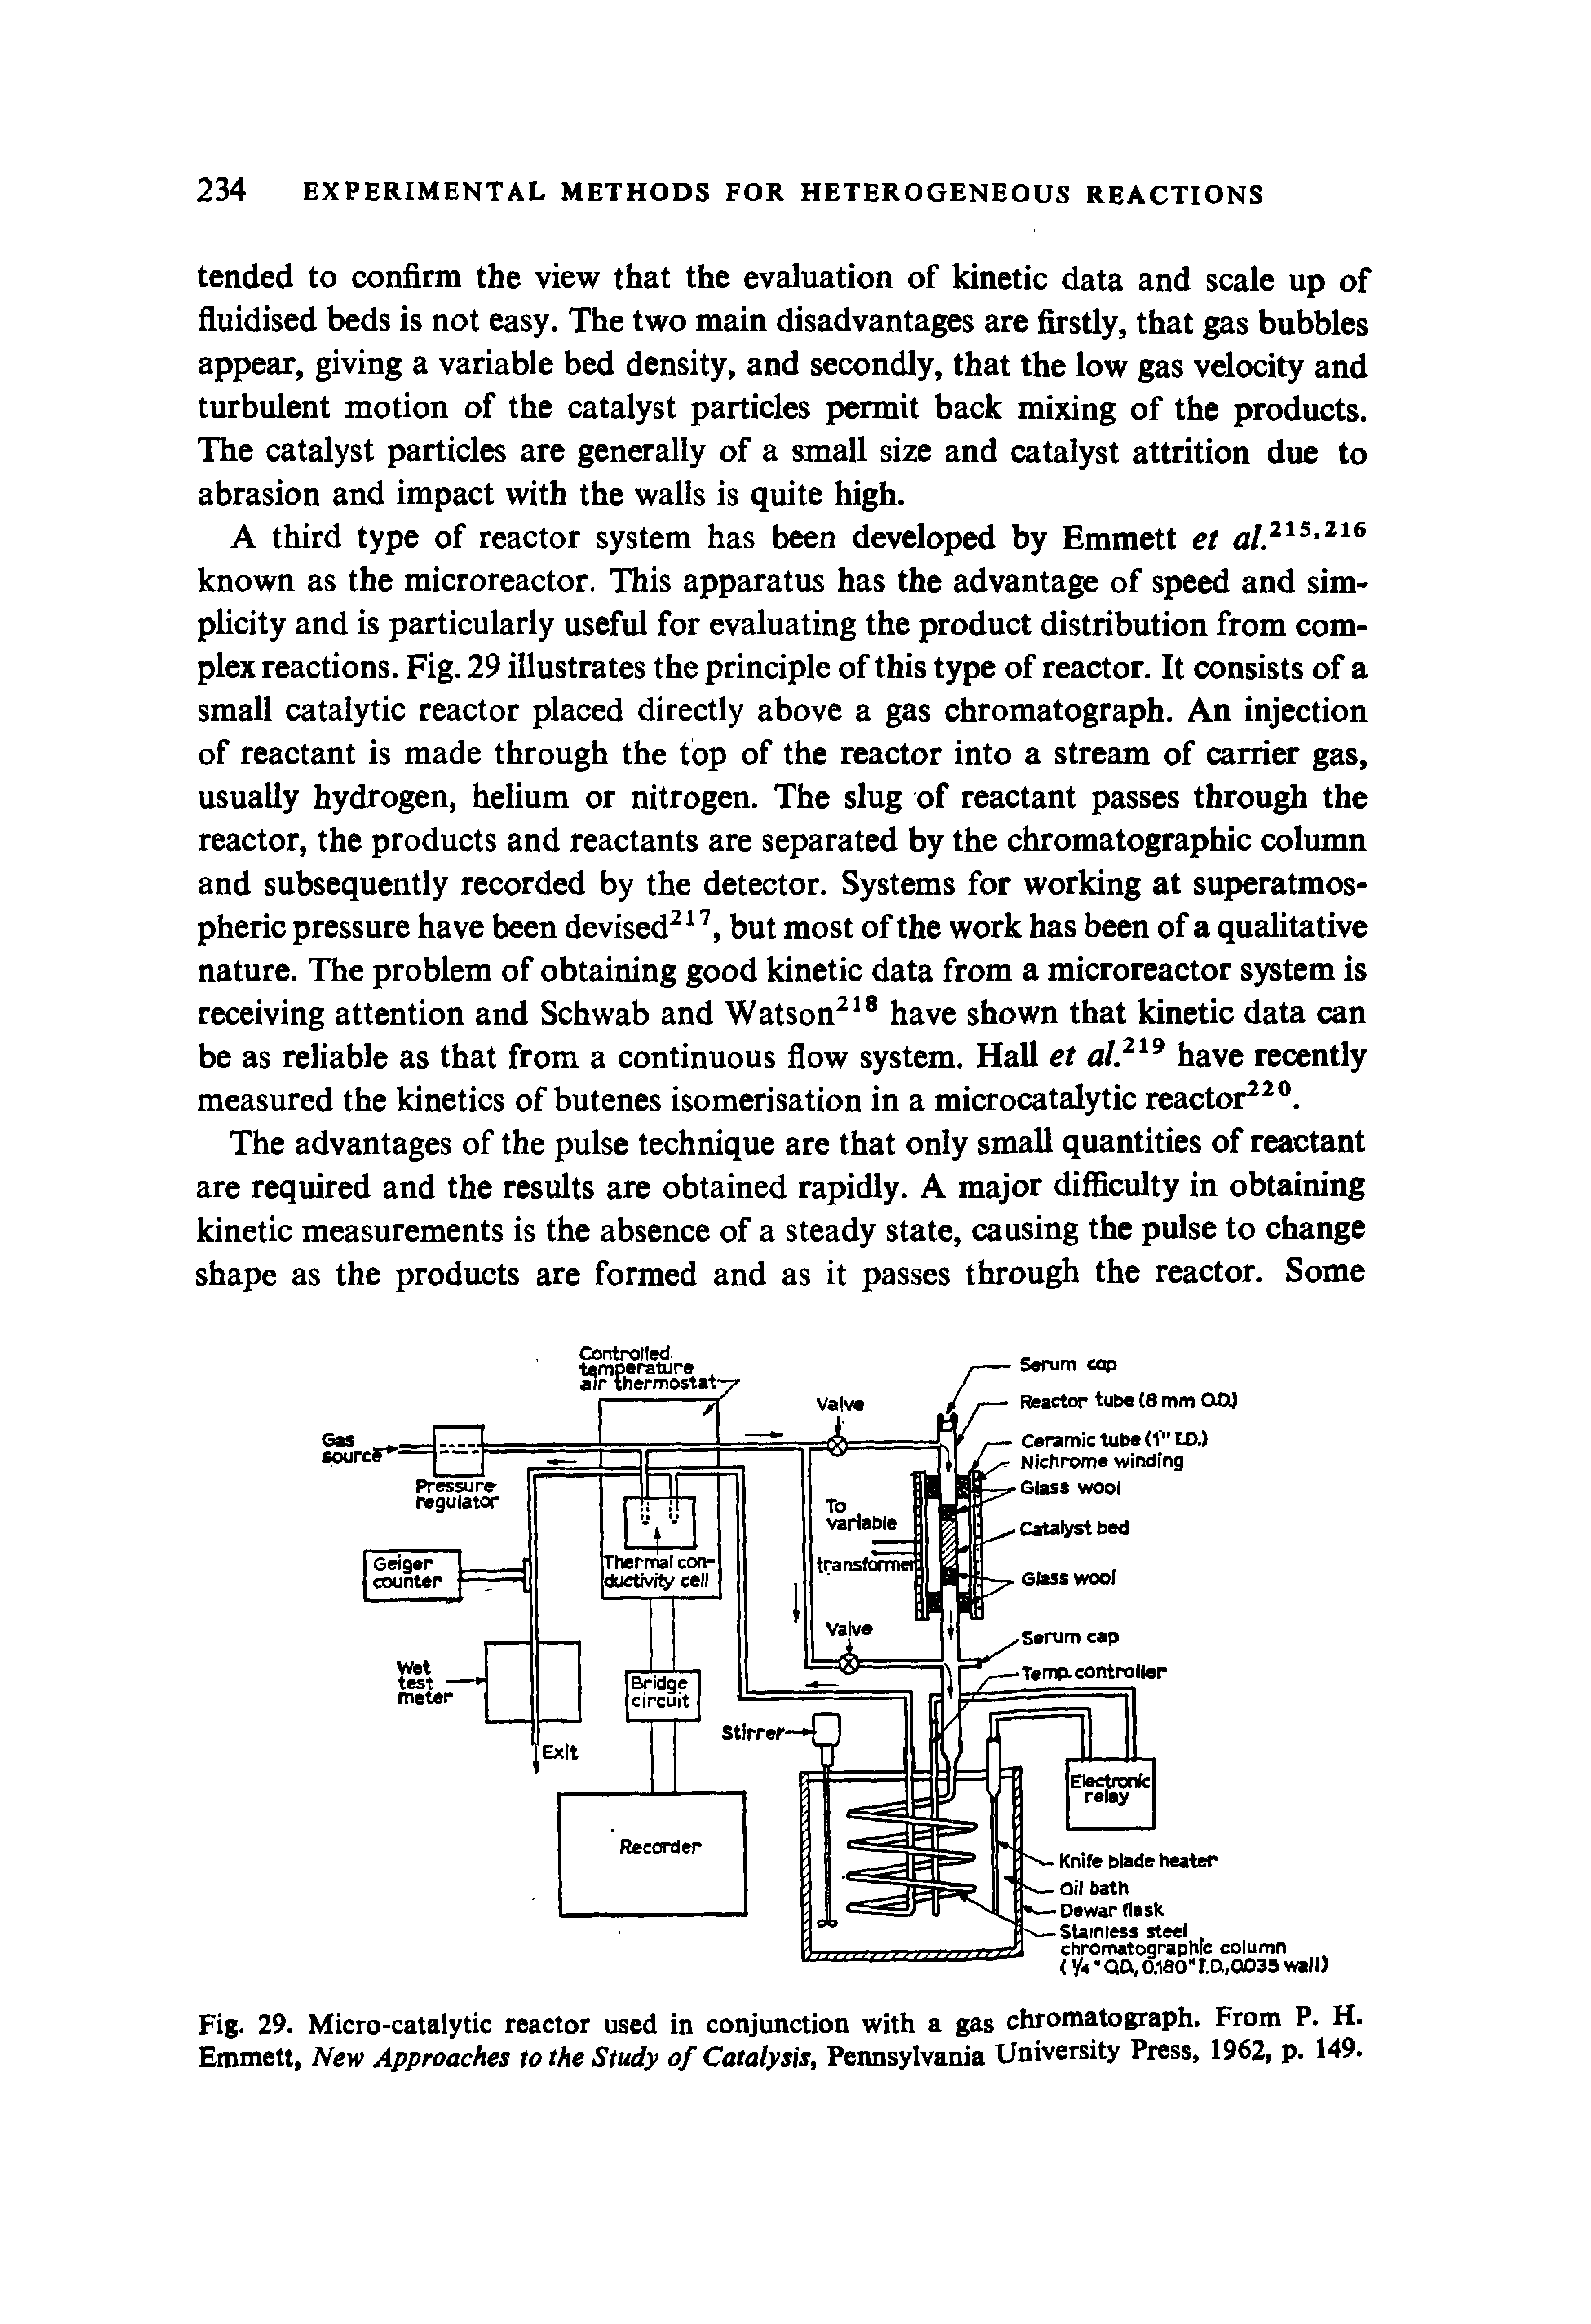 Fig. 29. Micro-catalytic reactor used in conjunction with a gas chromatograph. From P. H. Emmett, New Approaches to the Study of CatalysiSt Pennsylvania University Press, 1962, p. 149.